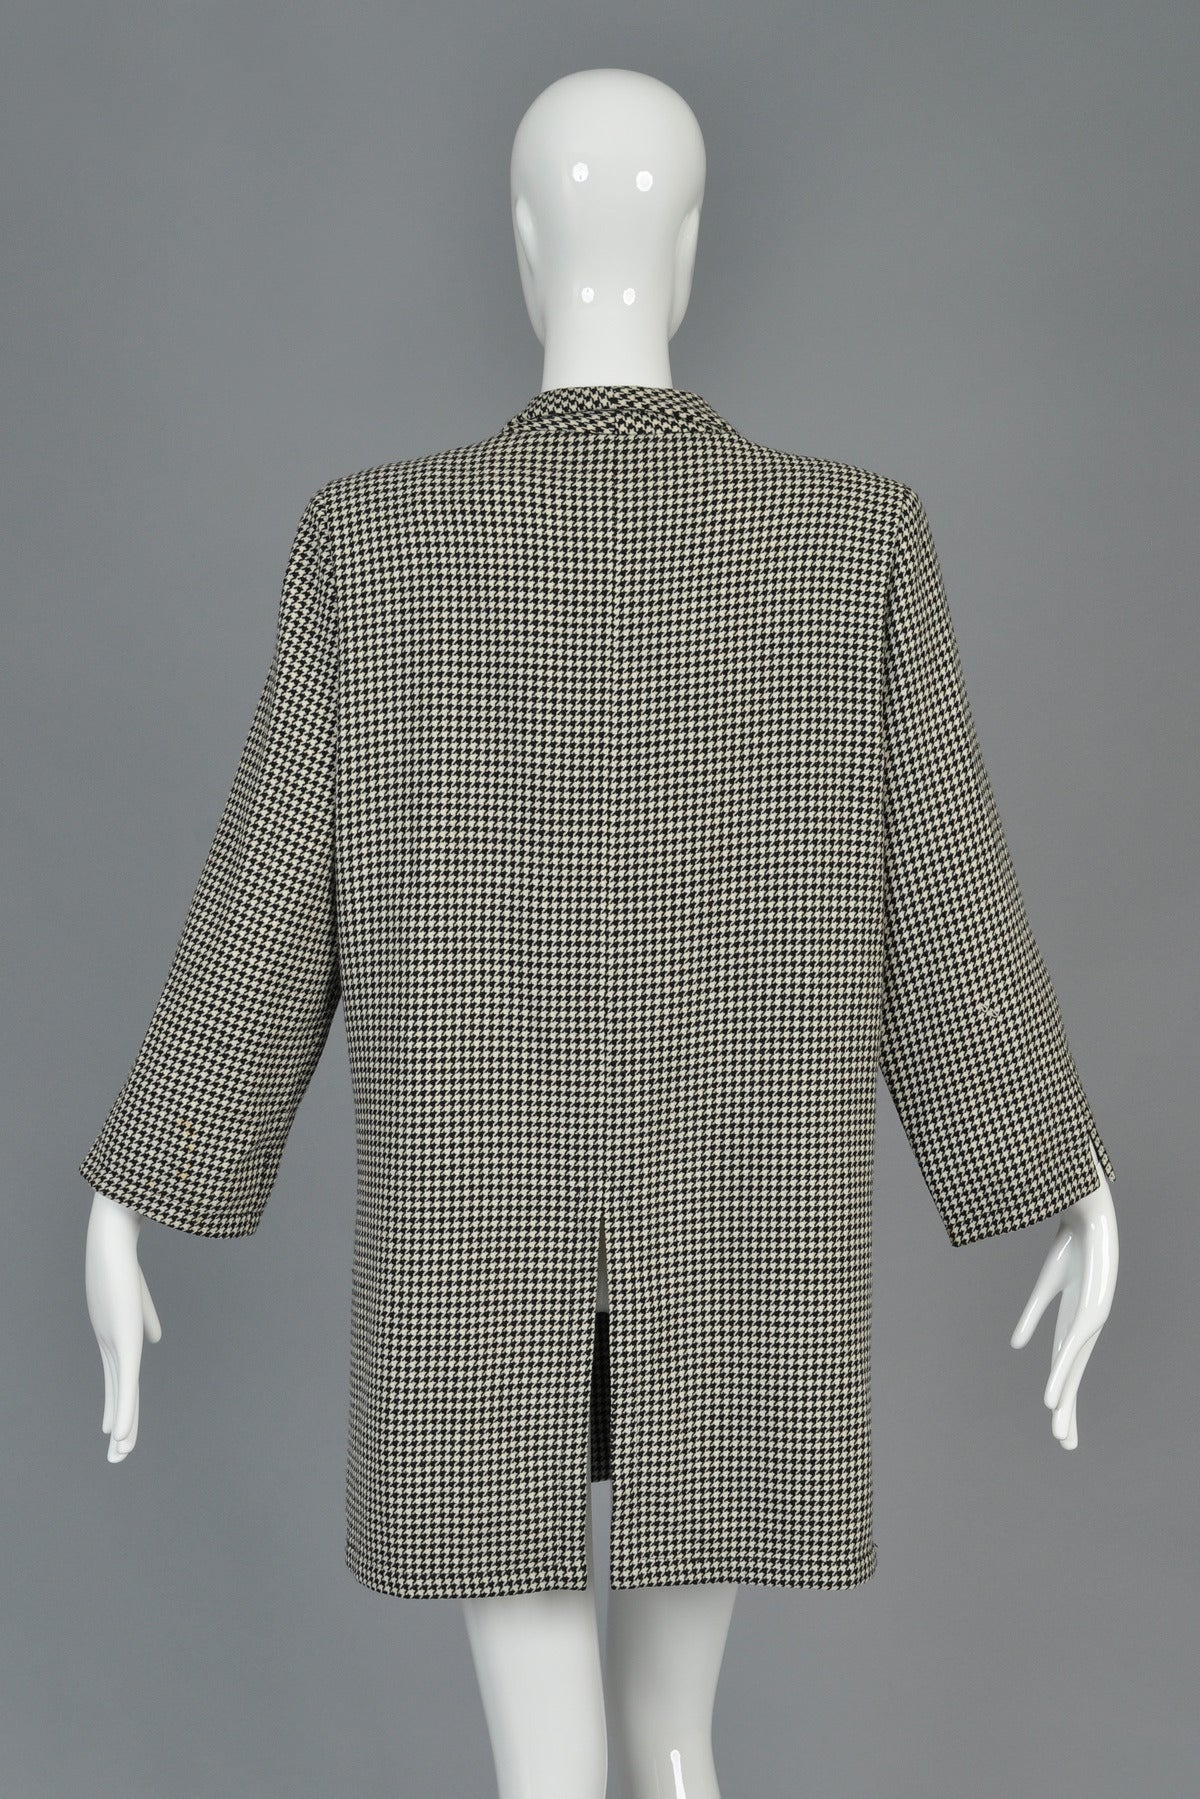 F/W 93 Pierre Cardin Haute Couture Houndstooth Vinyl Tie Jacket For Sale 3